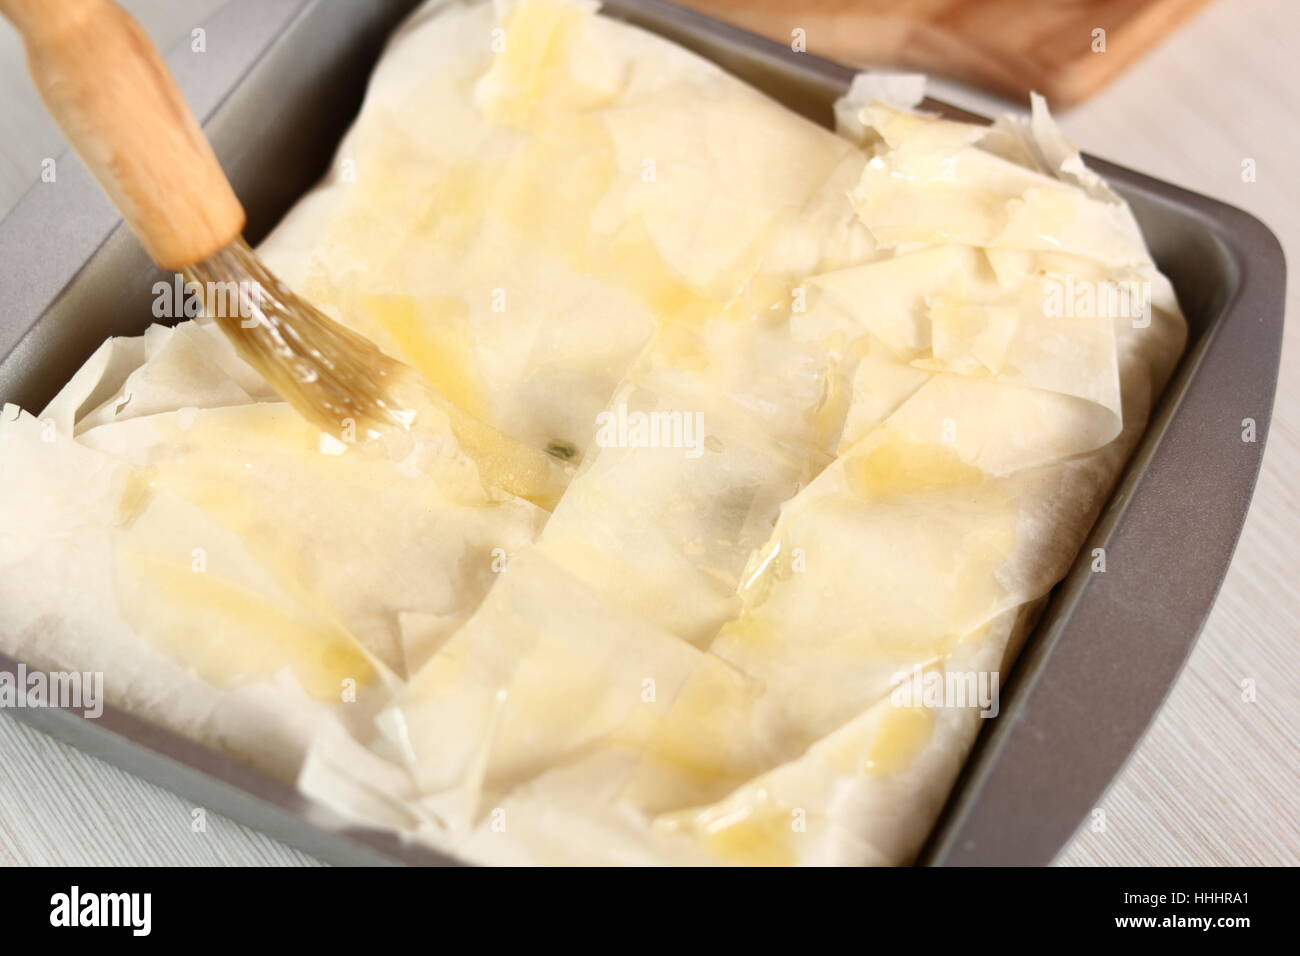 Brush top of pastry of with melted butter. Making Potato and Leek Filo Pie. Series. Stock Photo